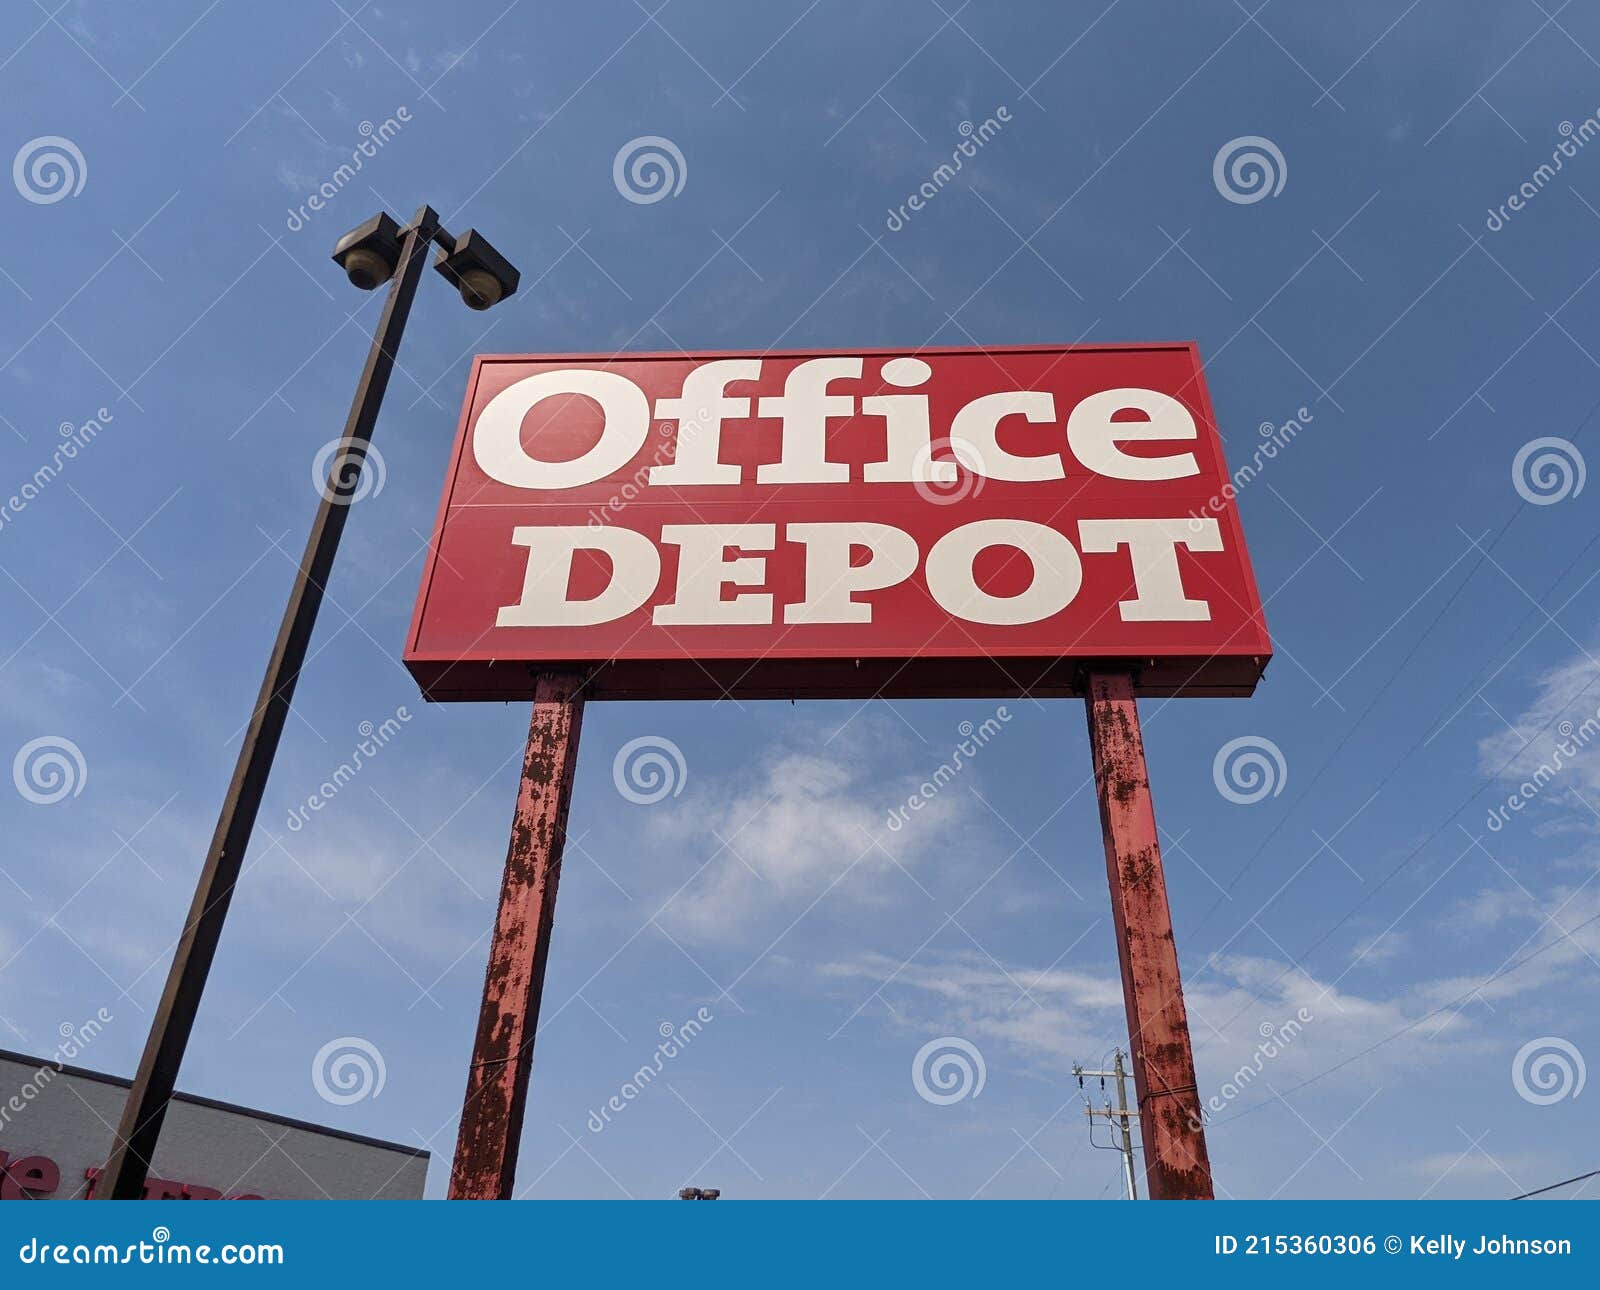 4 205 Office Depot Photos Free Royalty Free Stock Photos From Dreamstime